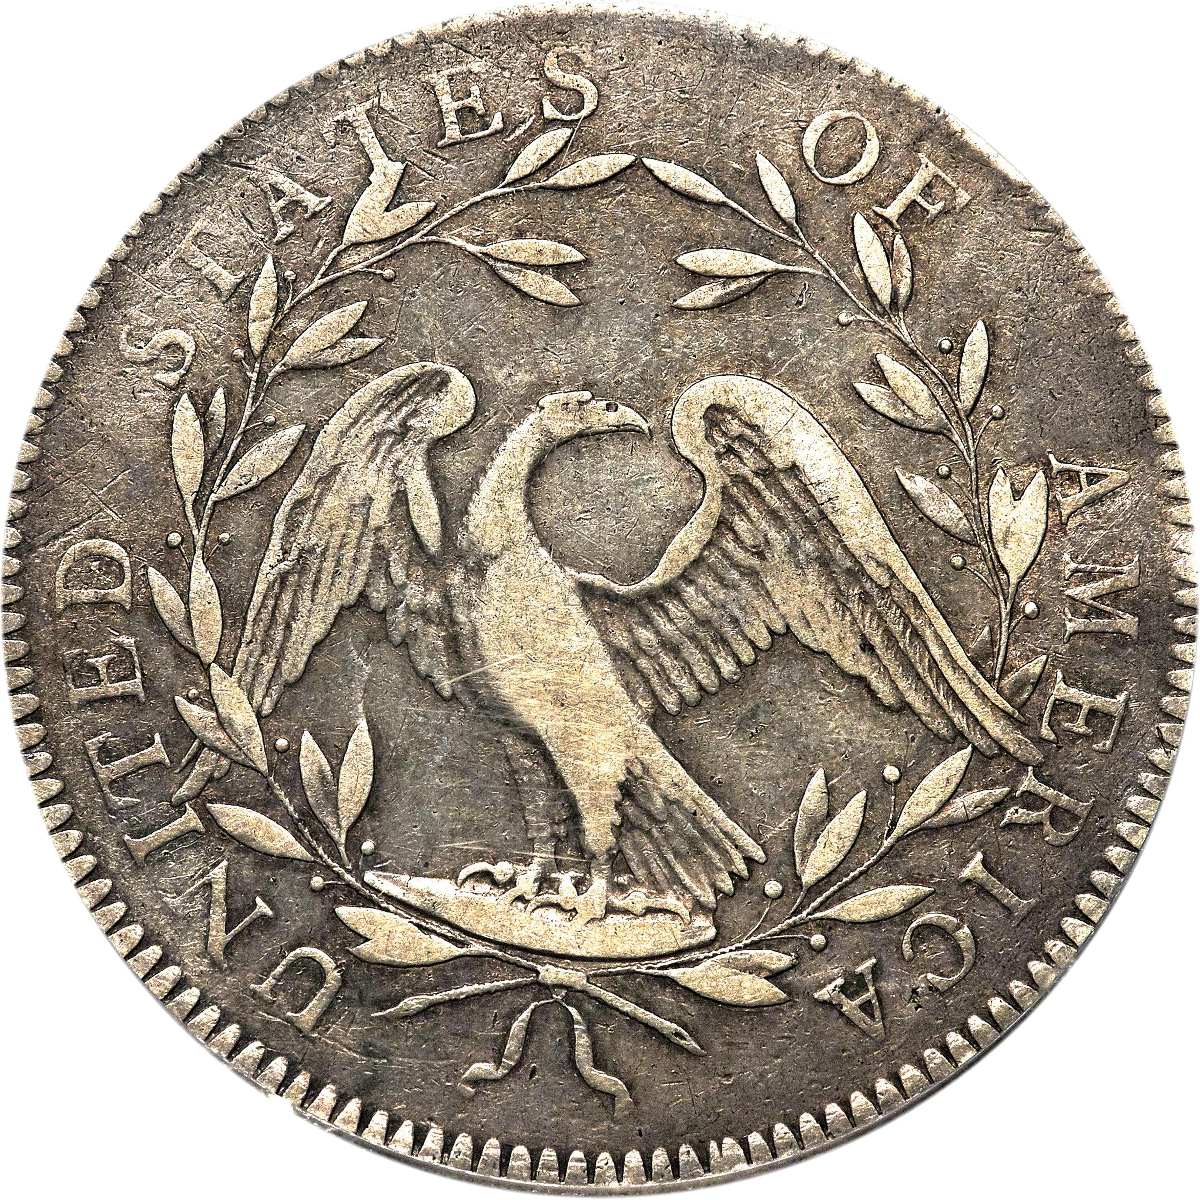 Obverse design of the 1794 Flowing Hair Dollar